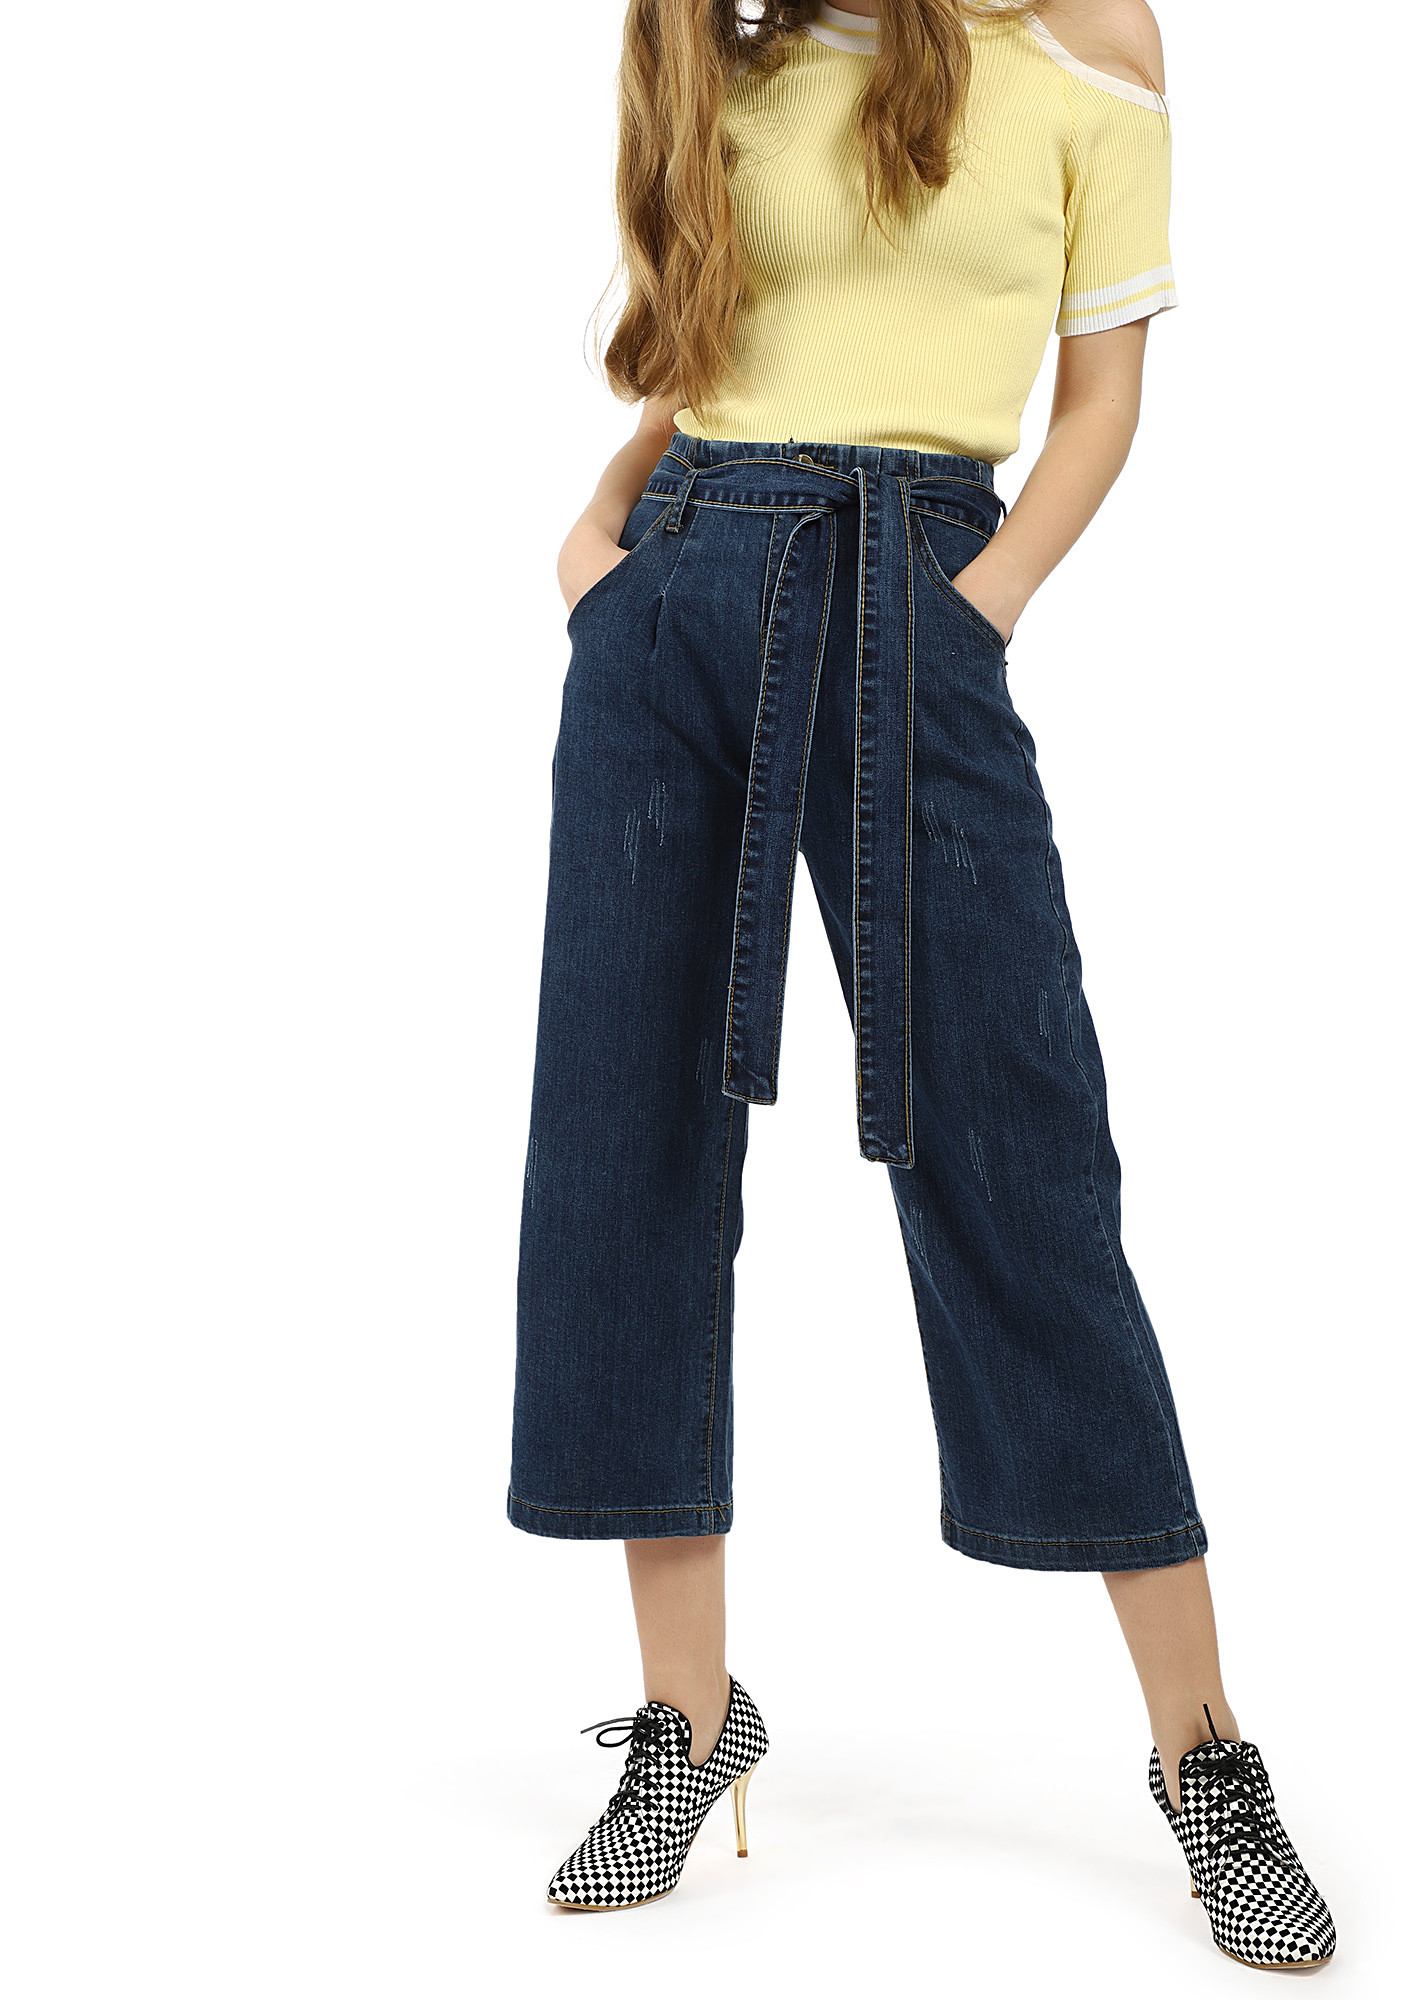 Buy Live Trendz Denim Culottes for Women at Amazon.in